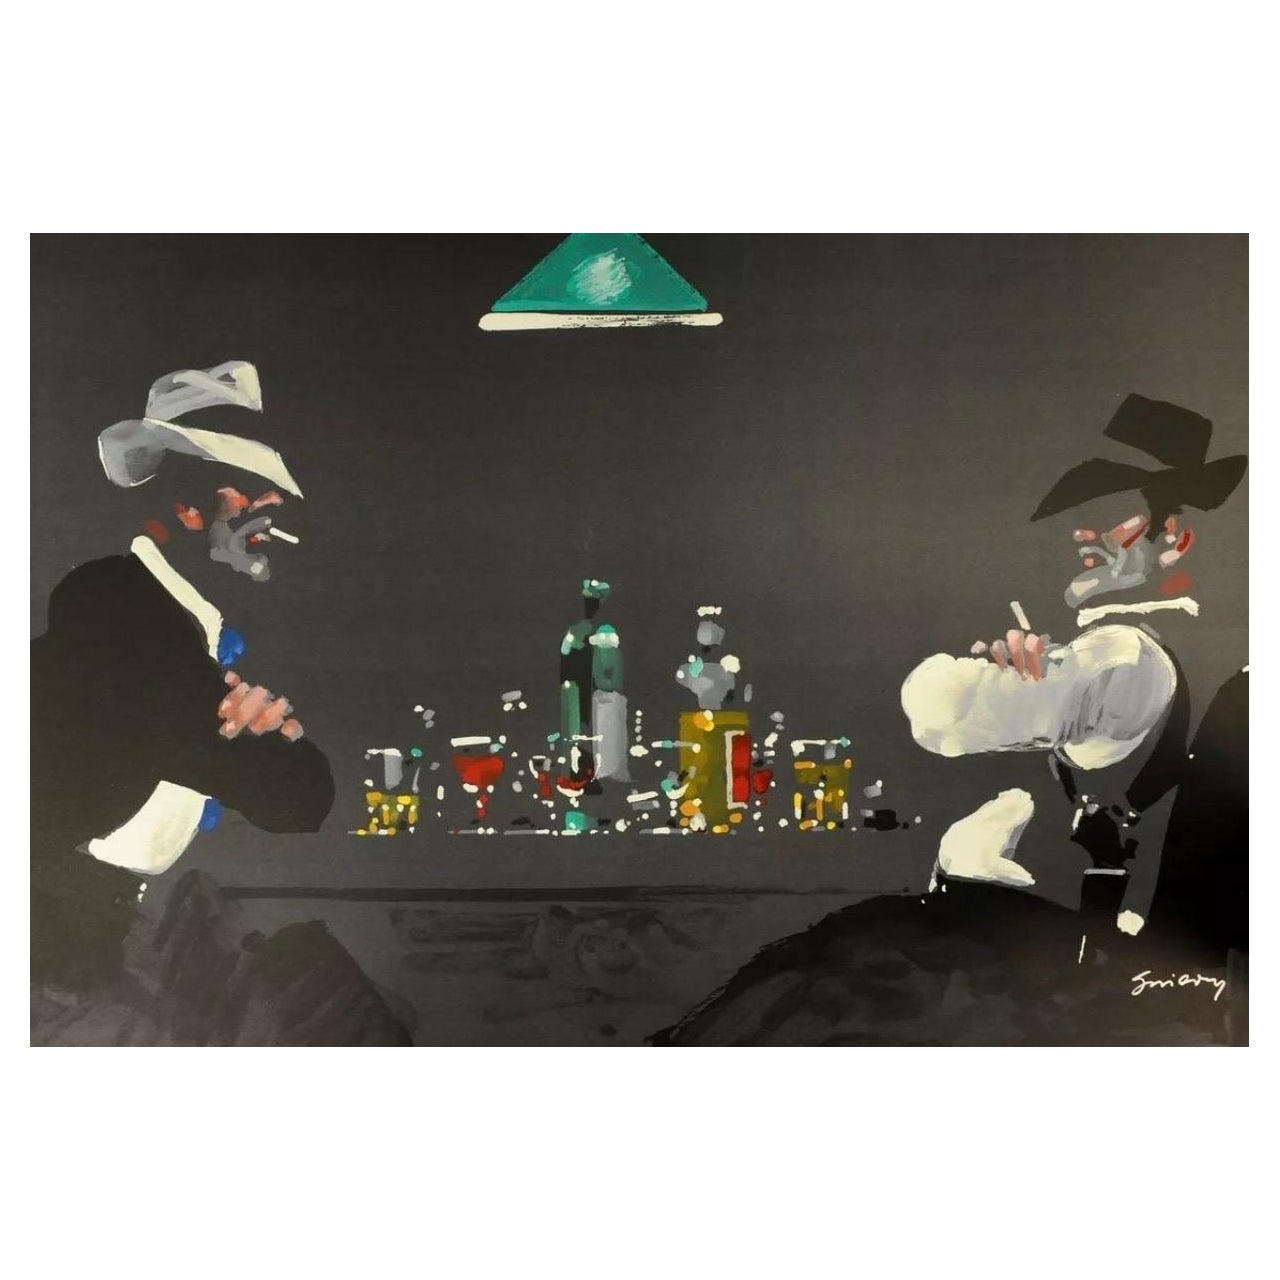 Signed Limited Edition Lithograph "Play for Keeps" by Waldemar Swierzy For Sale